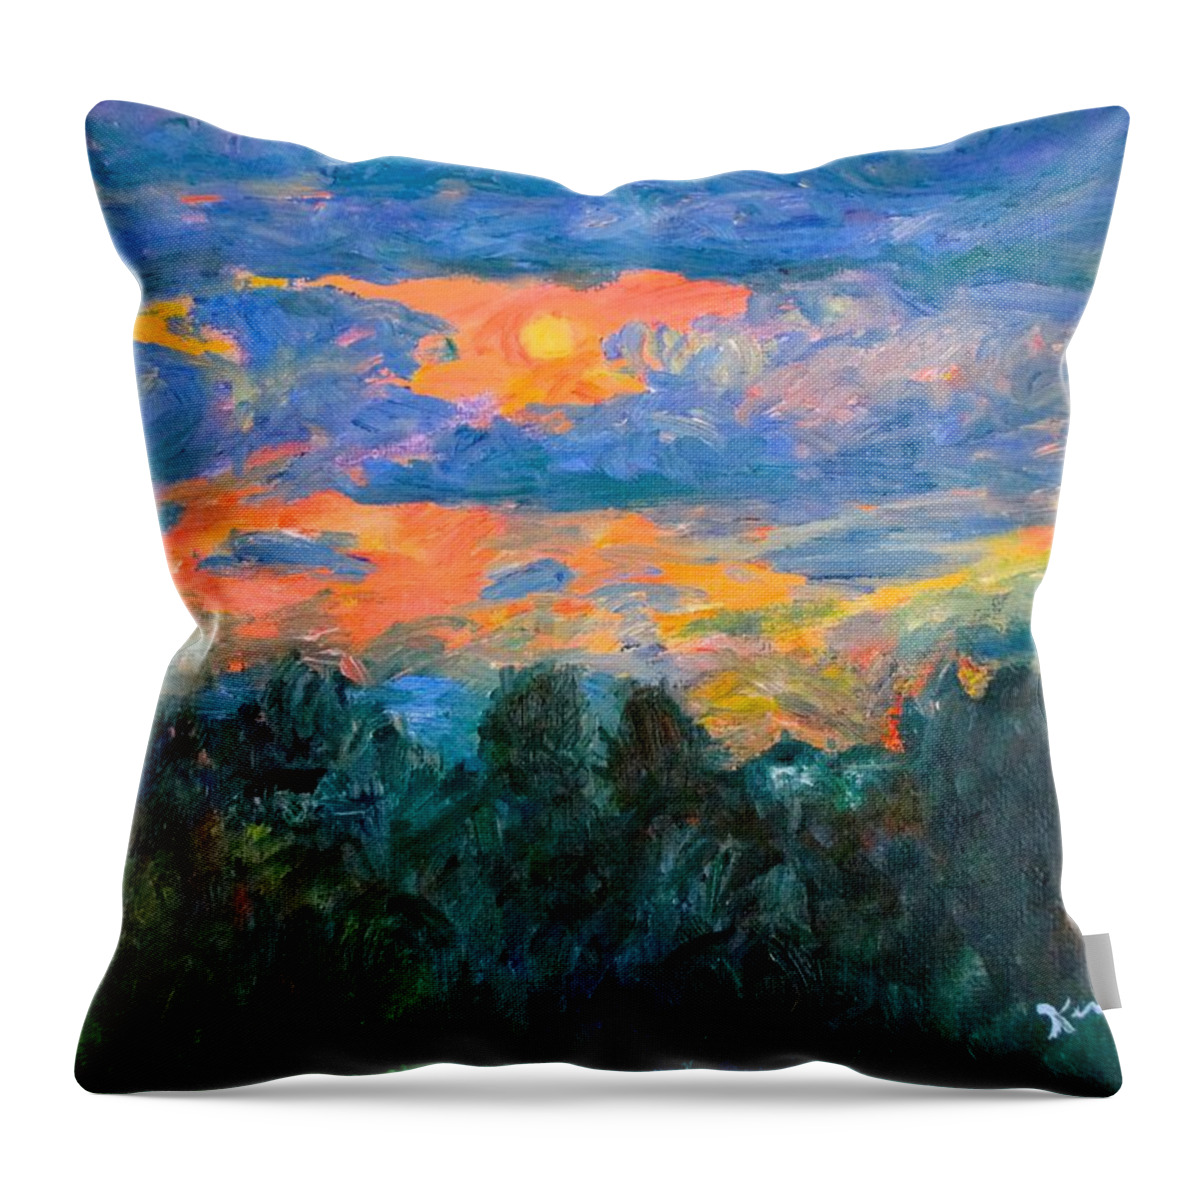 Kendall Kessler Throw Pillow featuring the painting Fairlawn Eve Stage Two by Kendall Kessler